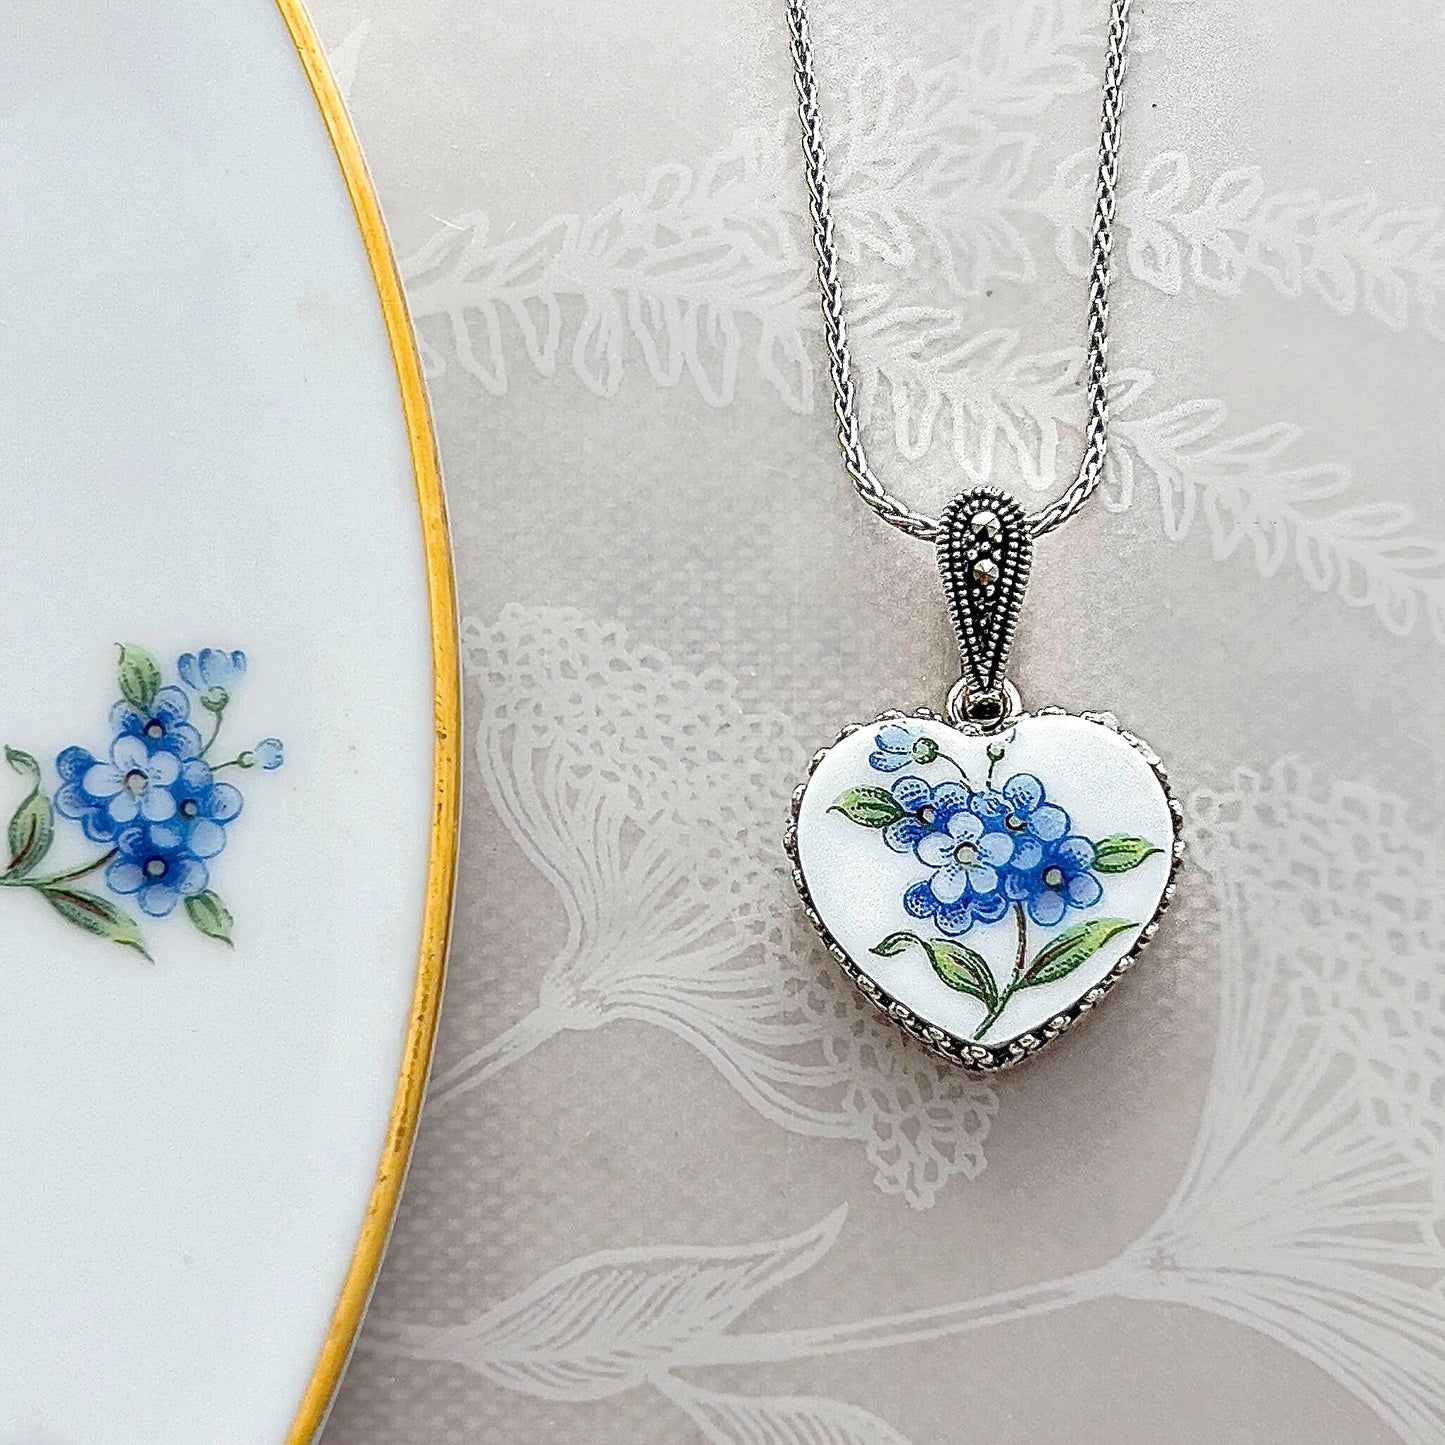 18th Anniversary Porcelain Gift for Wife, Forget Me Not Necklace, Broken China Jewelry, Marcasite Stones